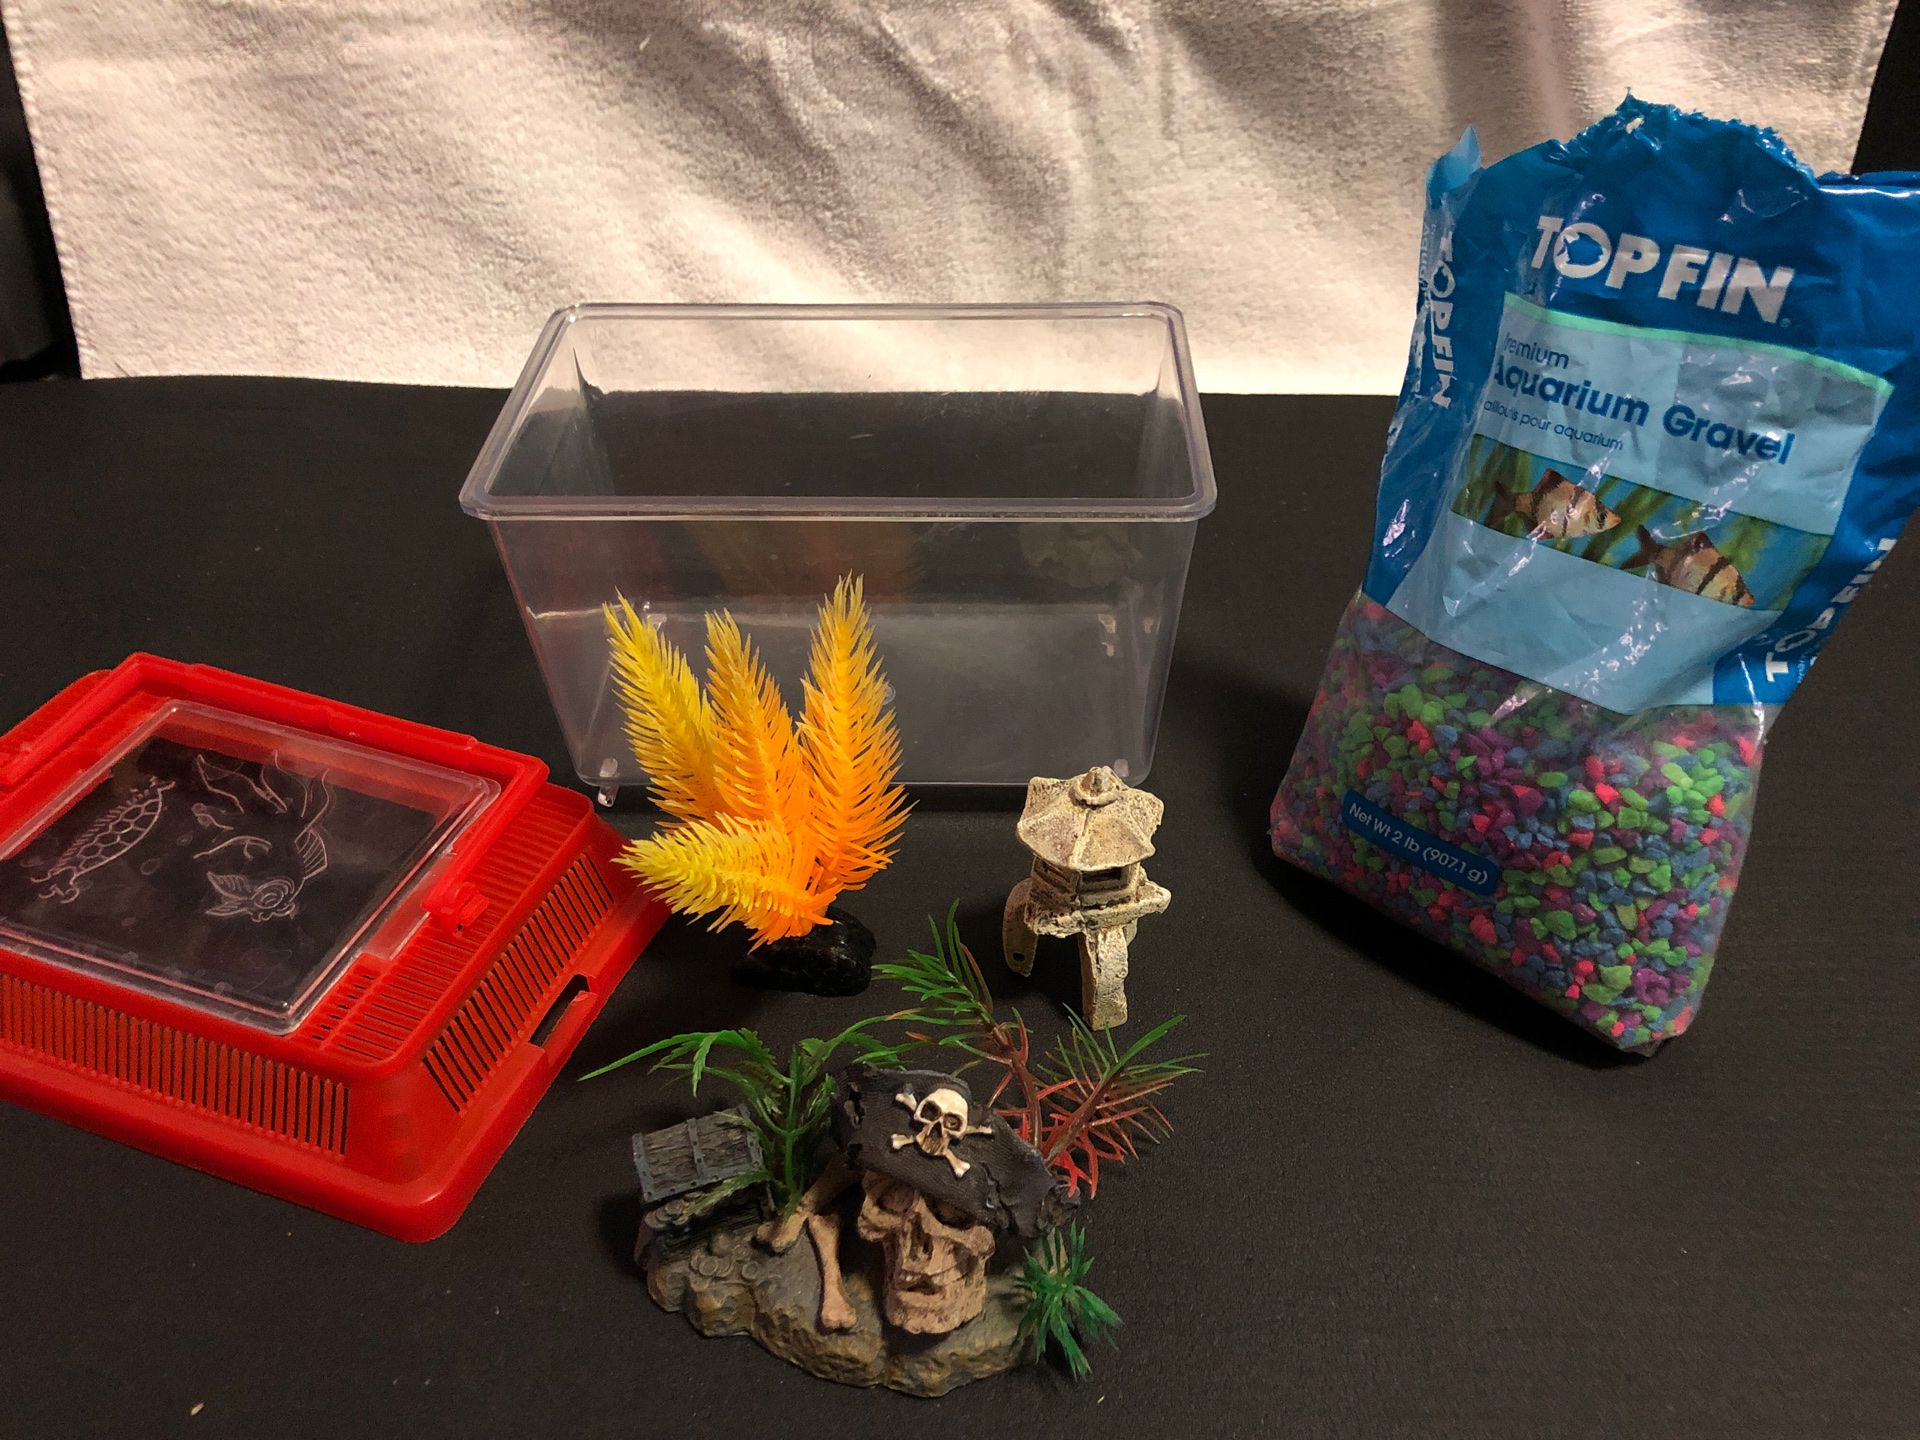 Small Fish Tank with Mulicolor Aquarium Gravel and 3 Decorations (Pirate Skull, Yellow Plastic Plant, Rock Structure)